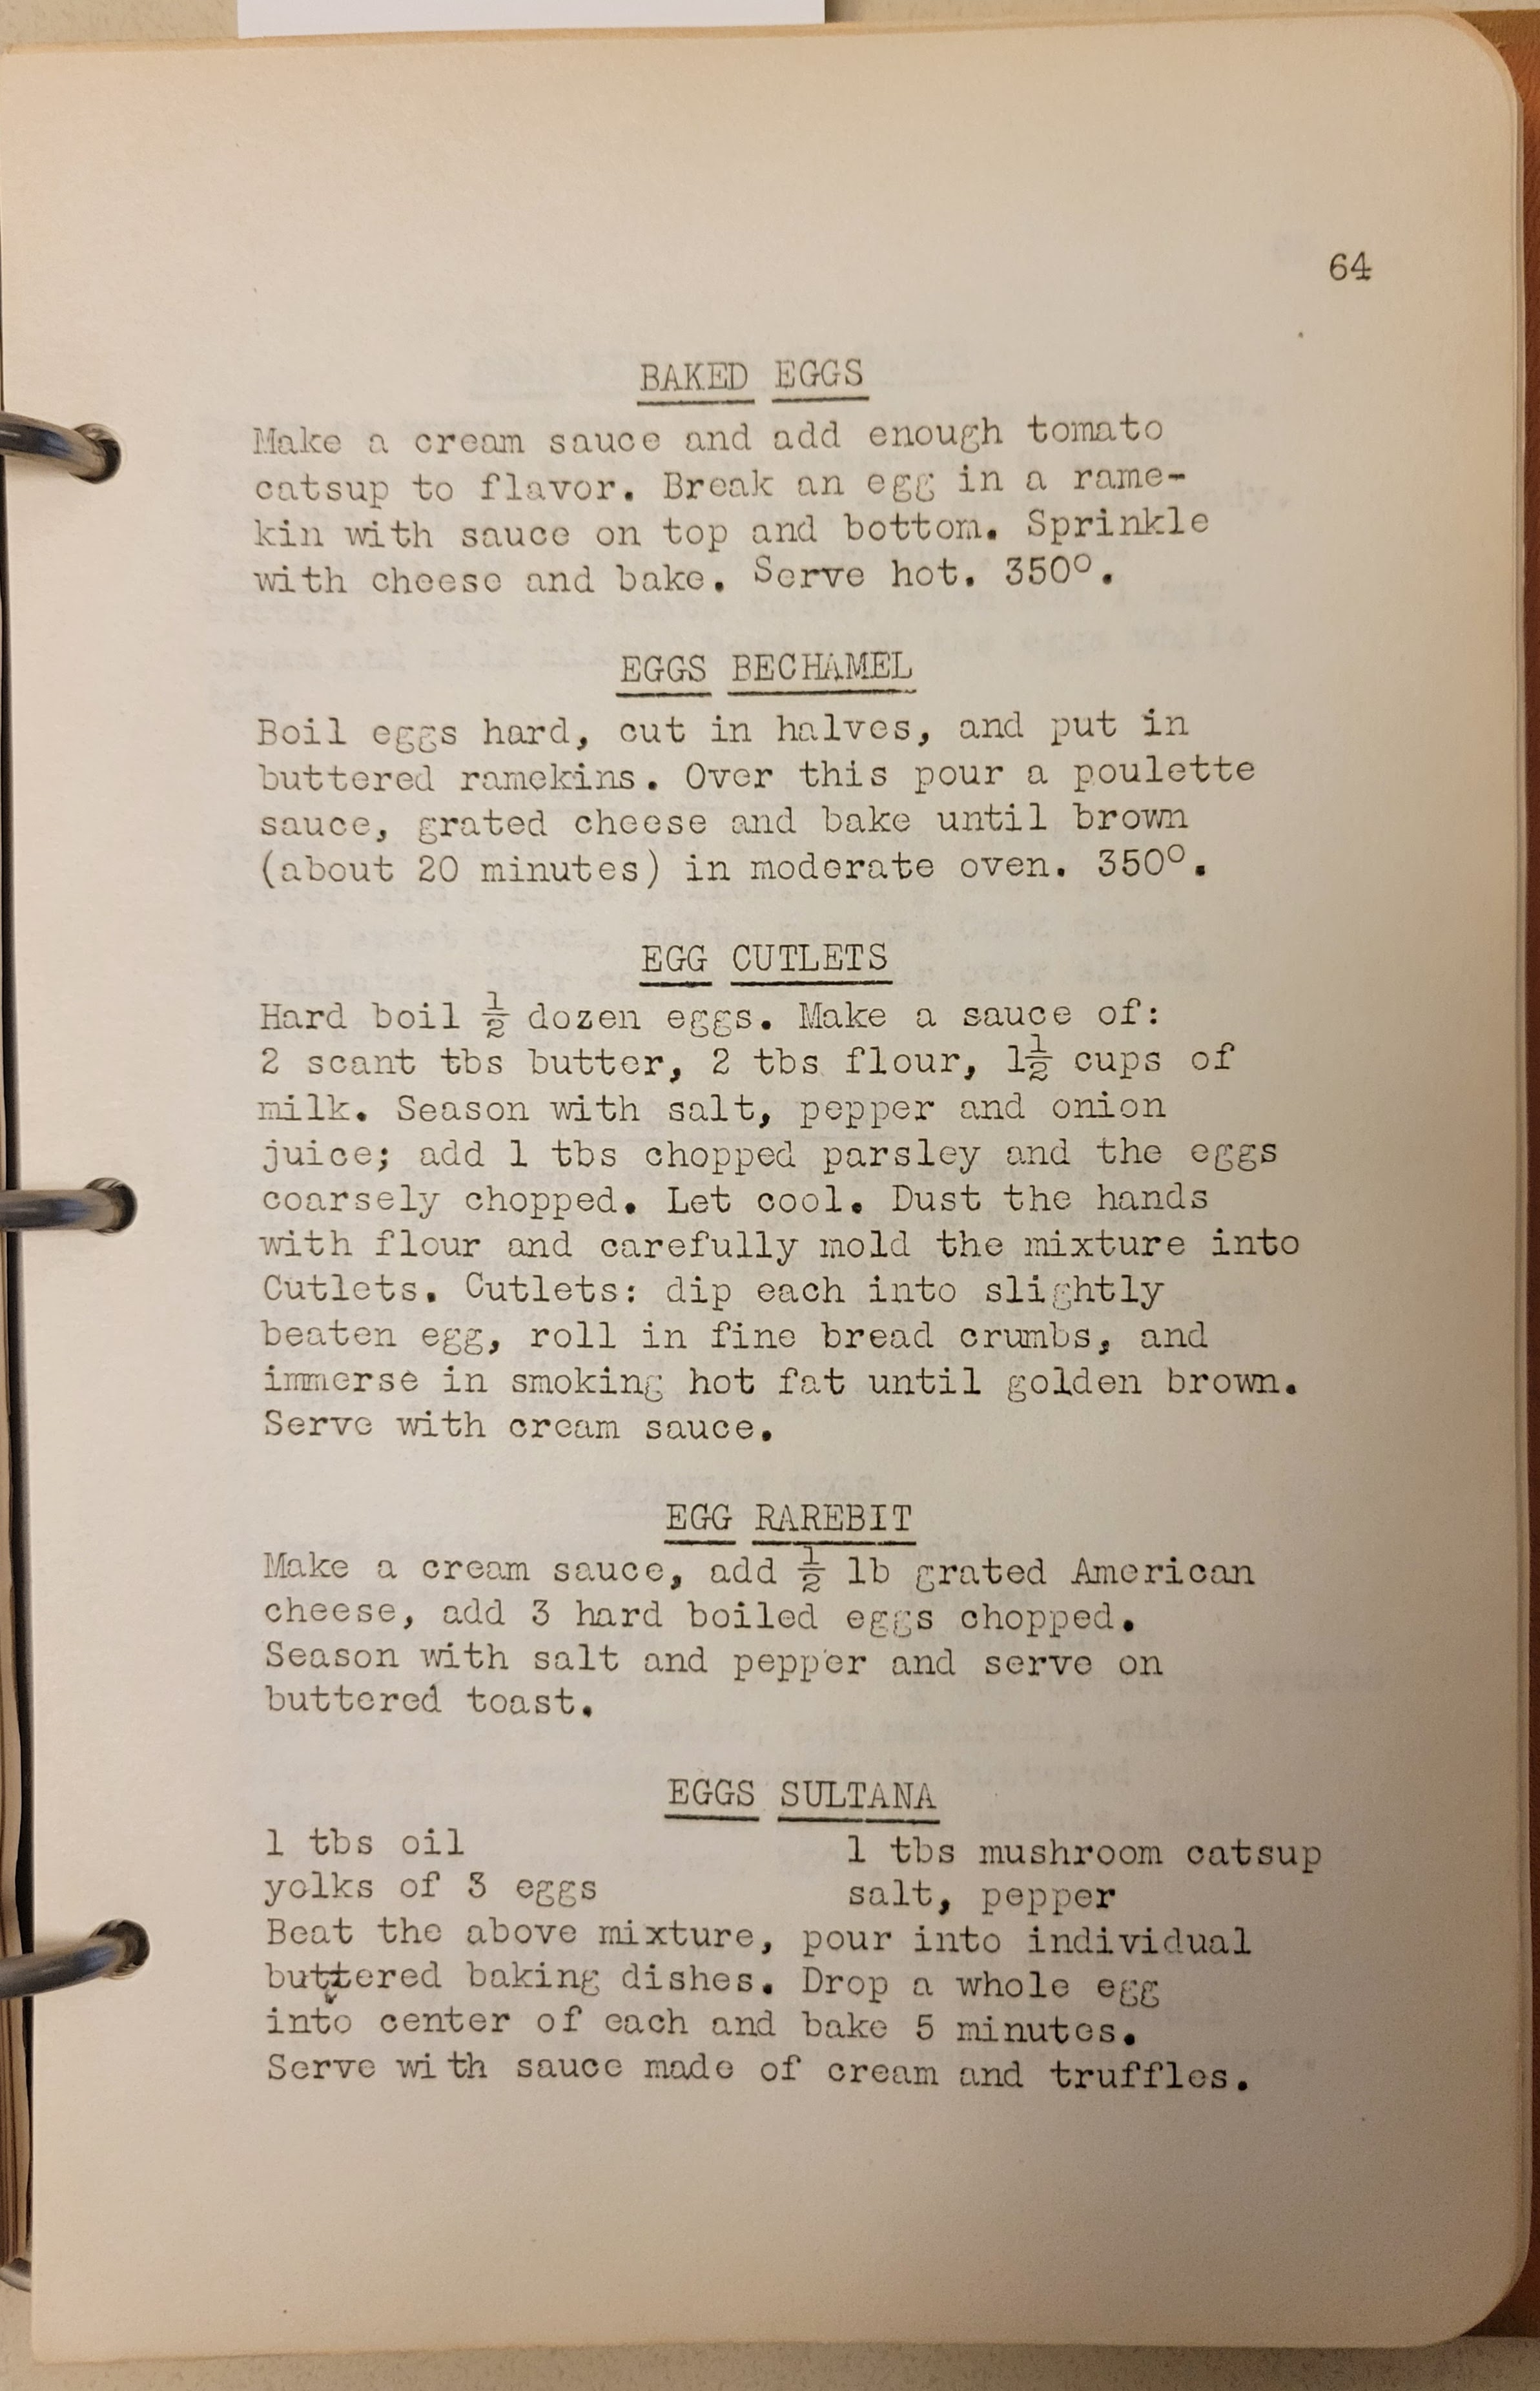 typewritten page in a 3-ring binder with instructions on cooking Jerusalem artichokes (boil in walt water with garlic and olive oil) as well as other vegetables such as Italian artichokes and Spanish beans.